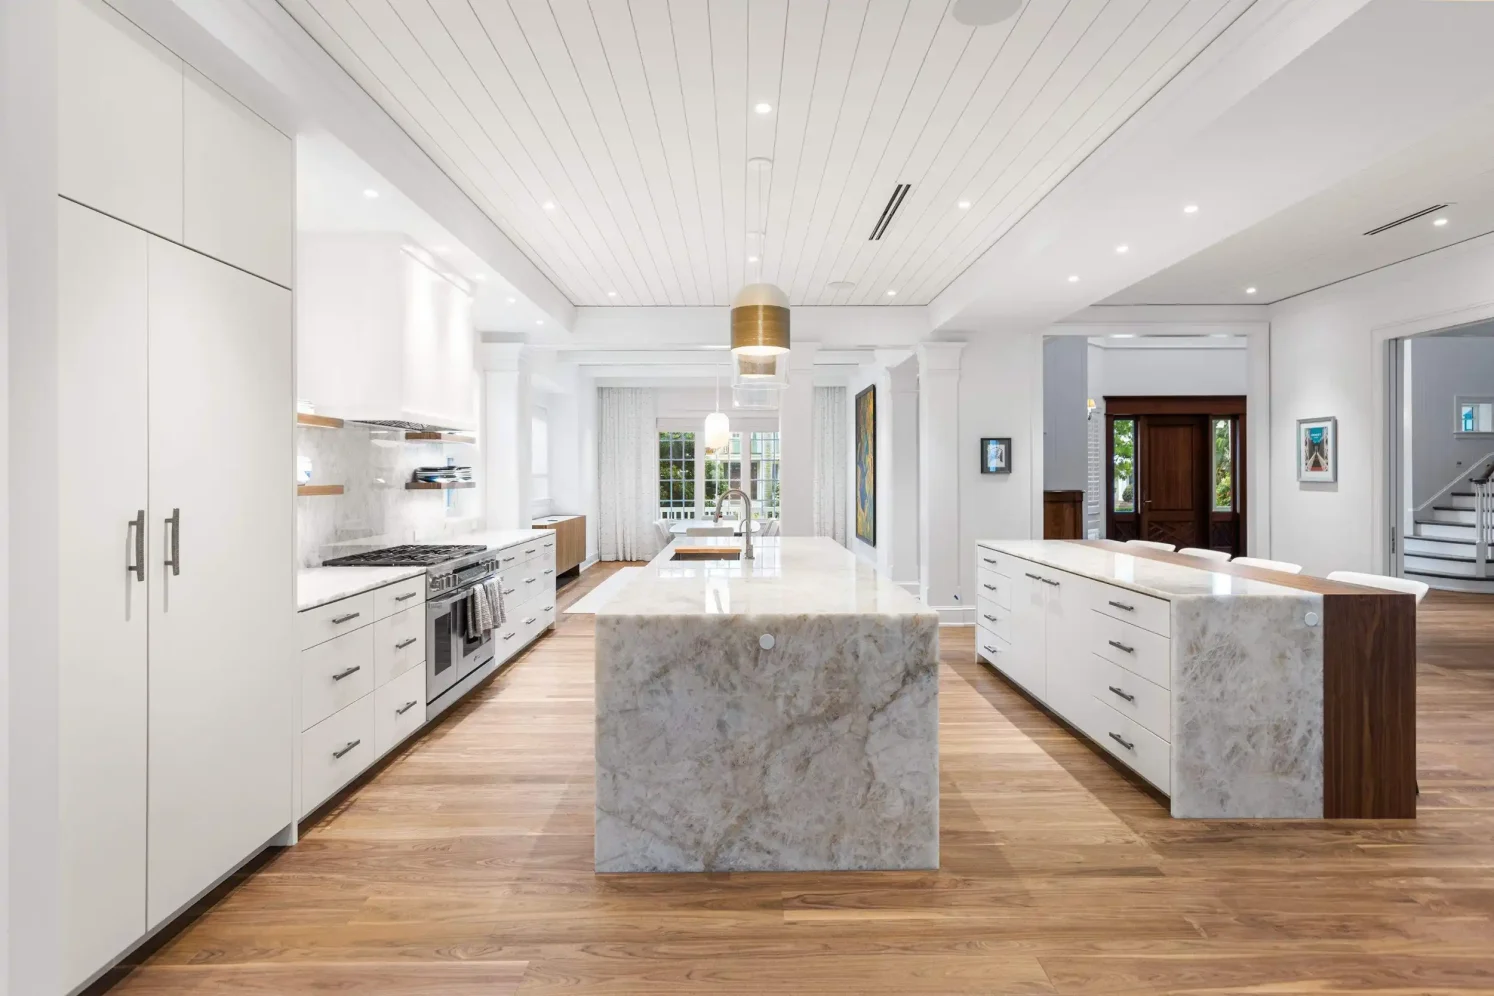 Luxury kitchen renovation with two islands